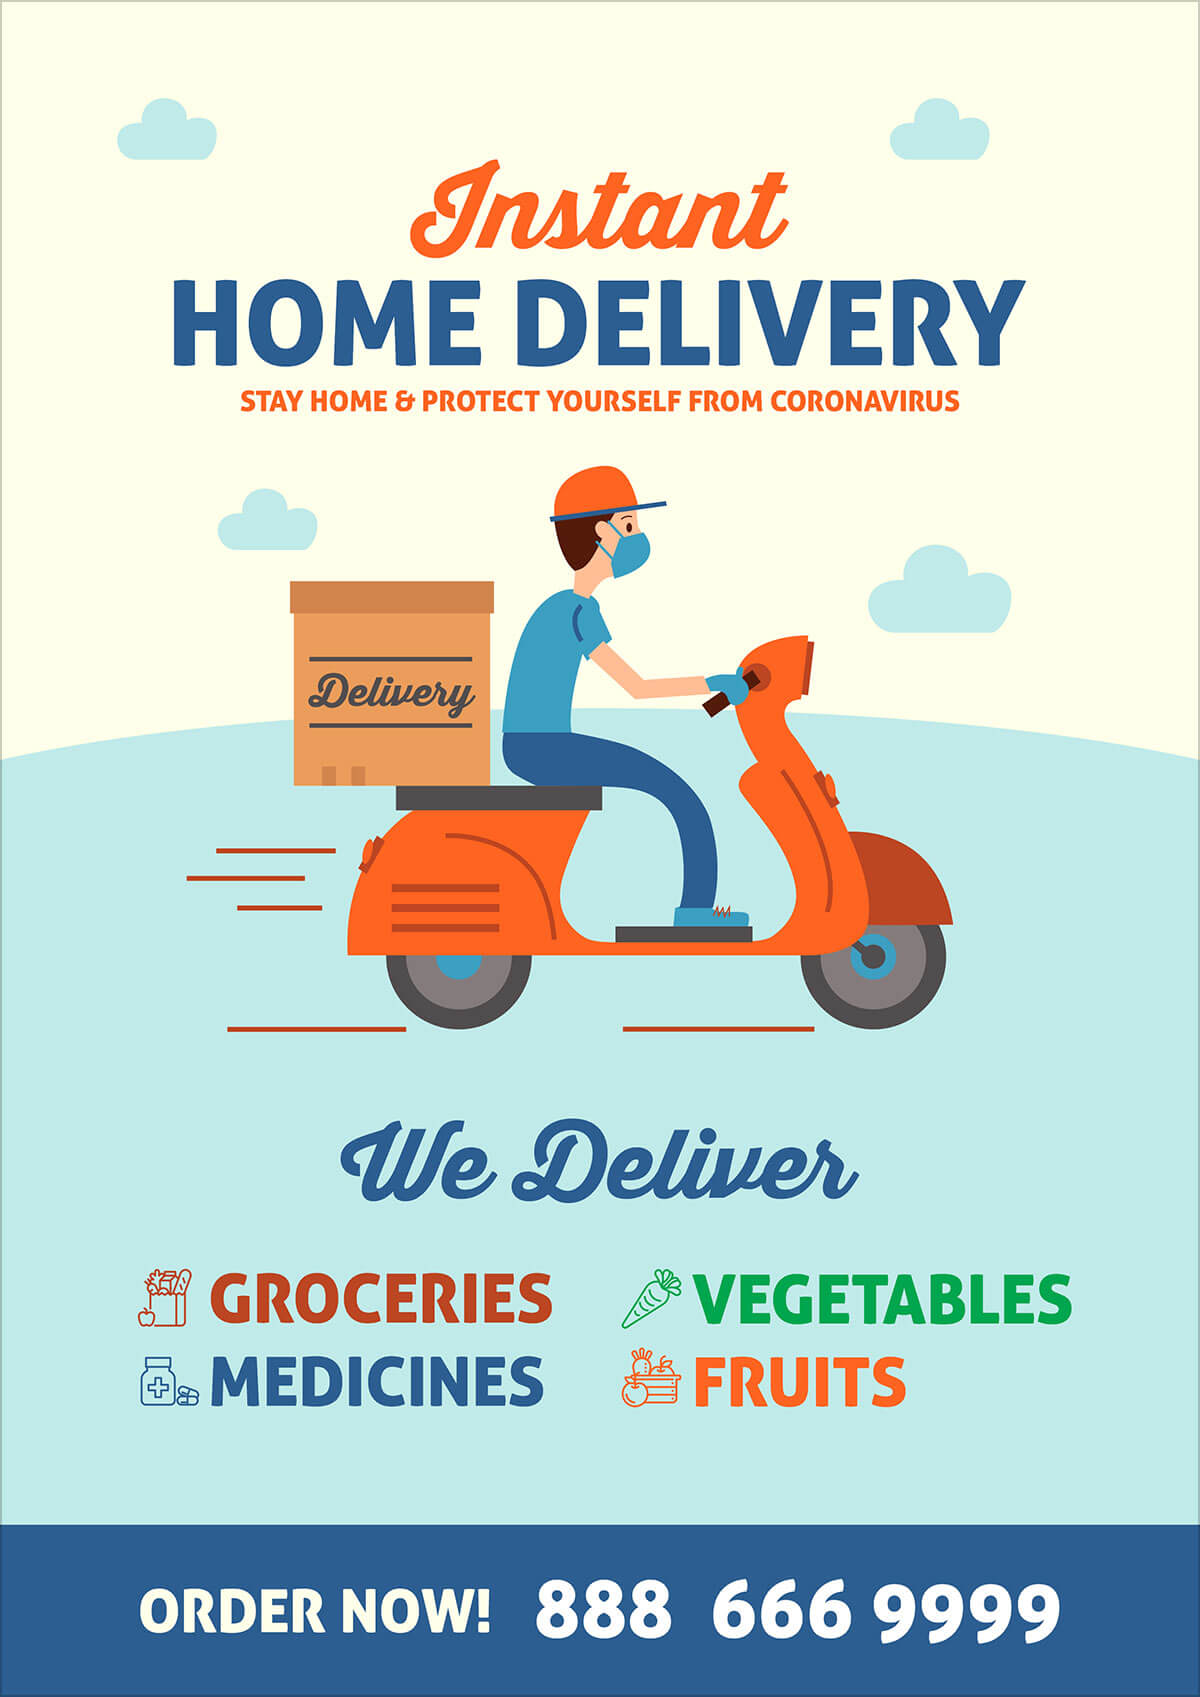 Free Grocery Home Delivery During Coronavirus Flyer Design In Delivery Flyer Template